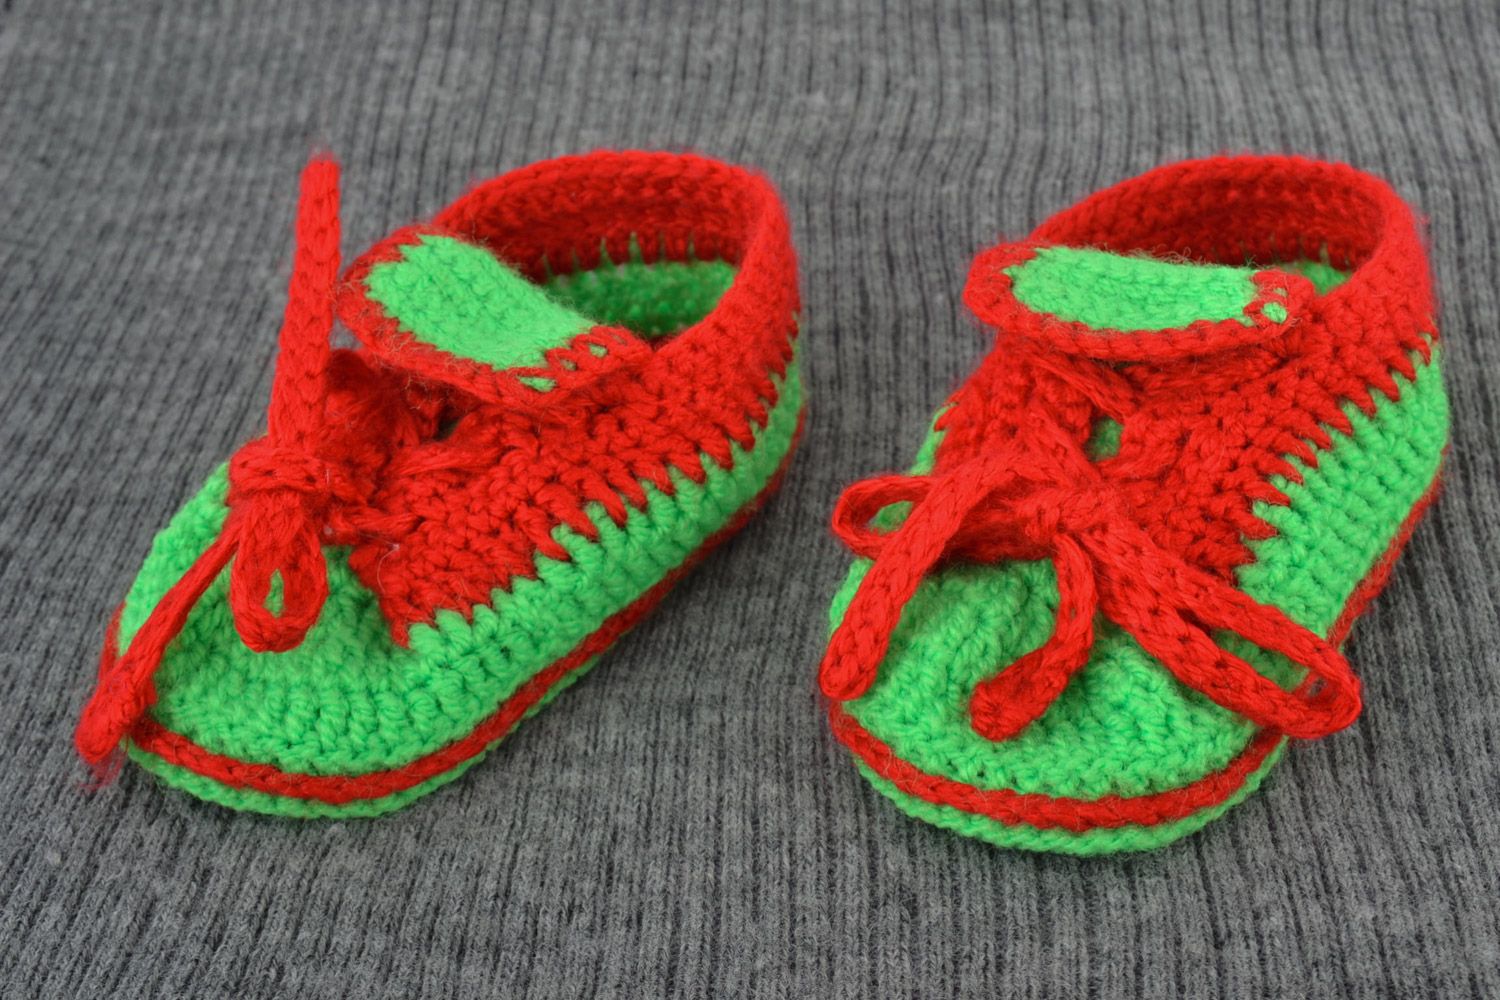 Red and green handmade knitted warm baby booties in the shape of shoes photo 1